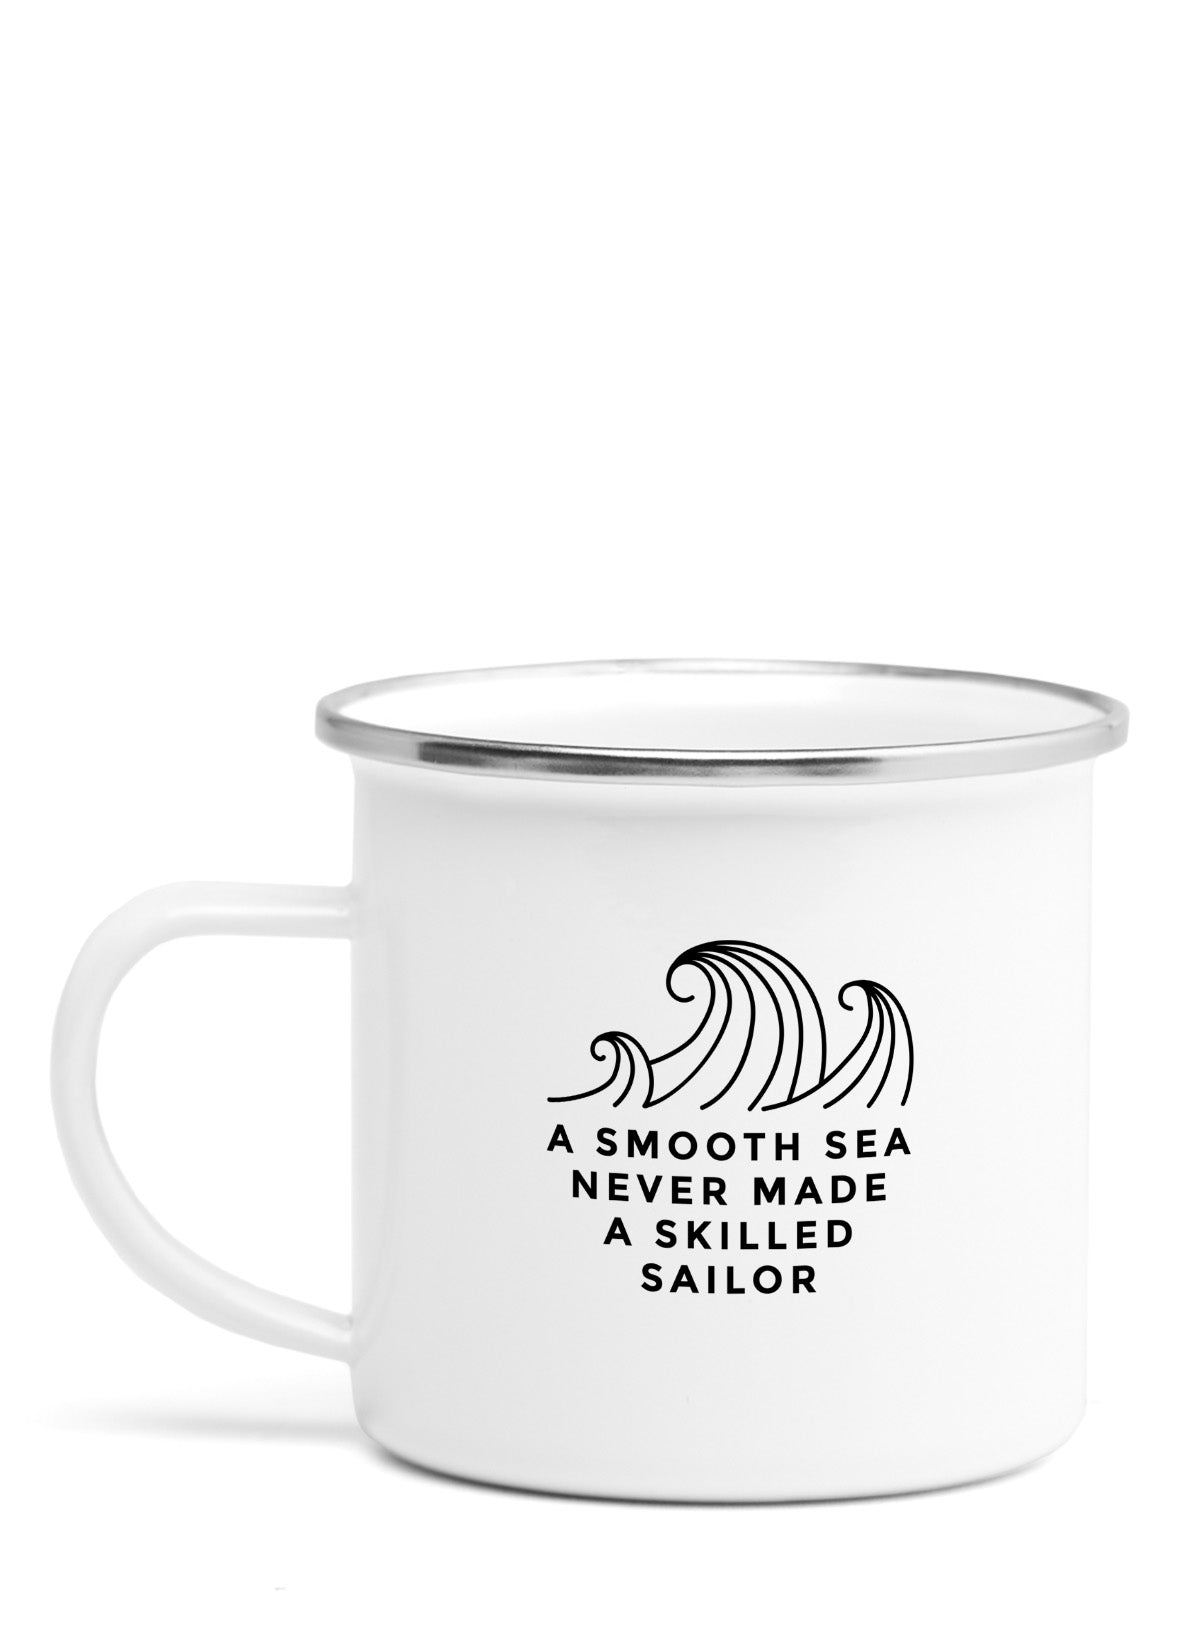 Emaille-becher "Smooth Sea"